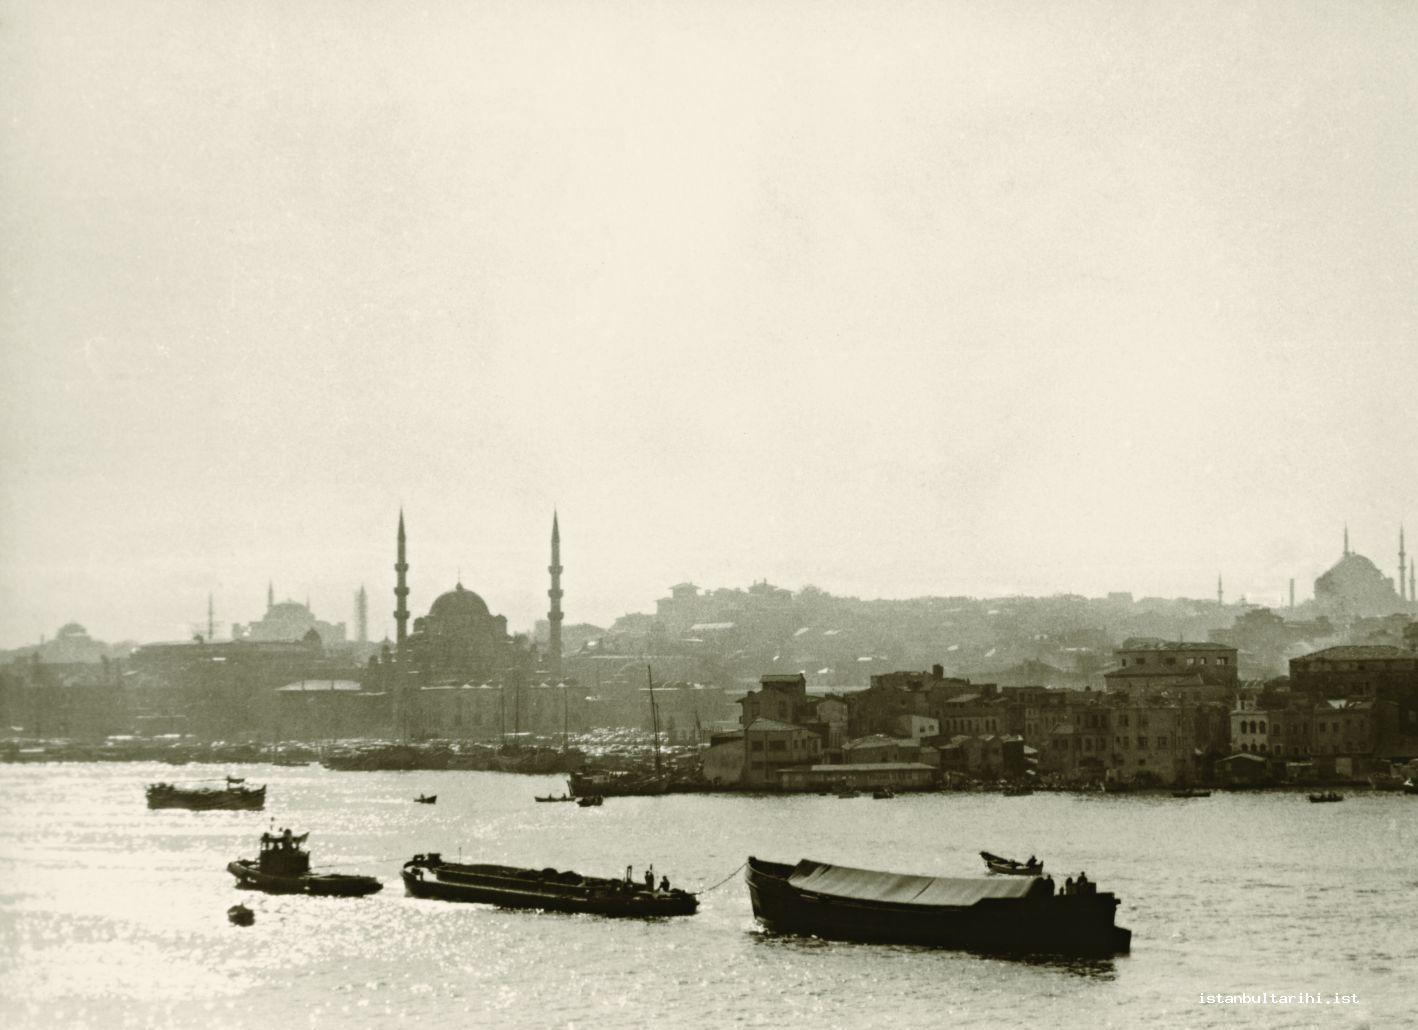 2- The partial view of the section of Istanbul within city walls from the Golden Horn.